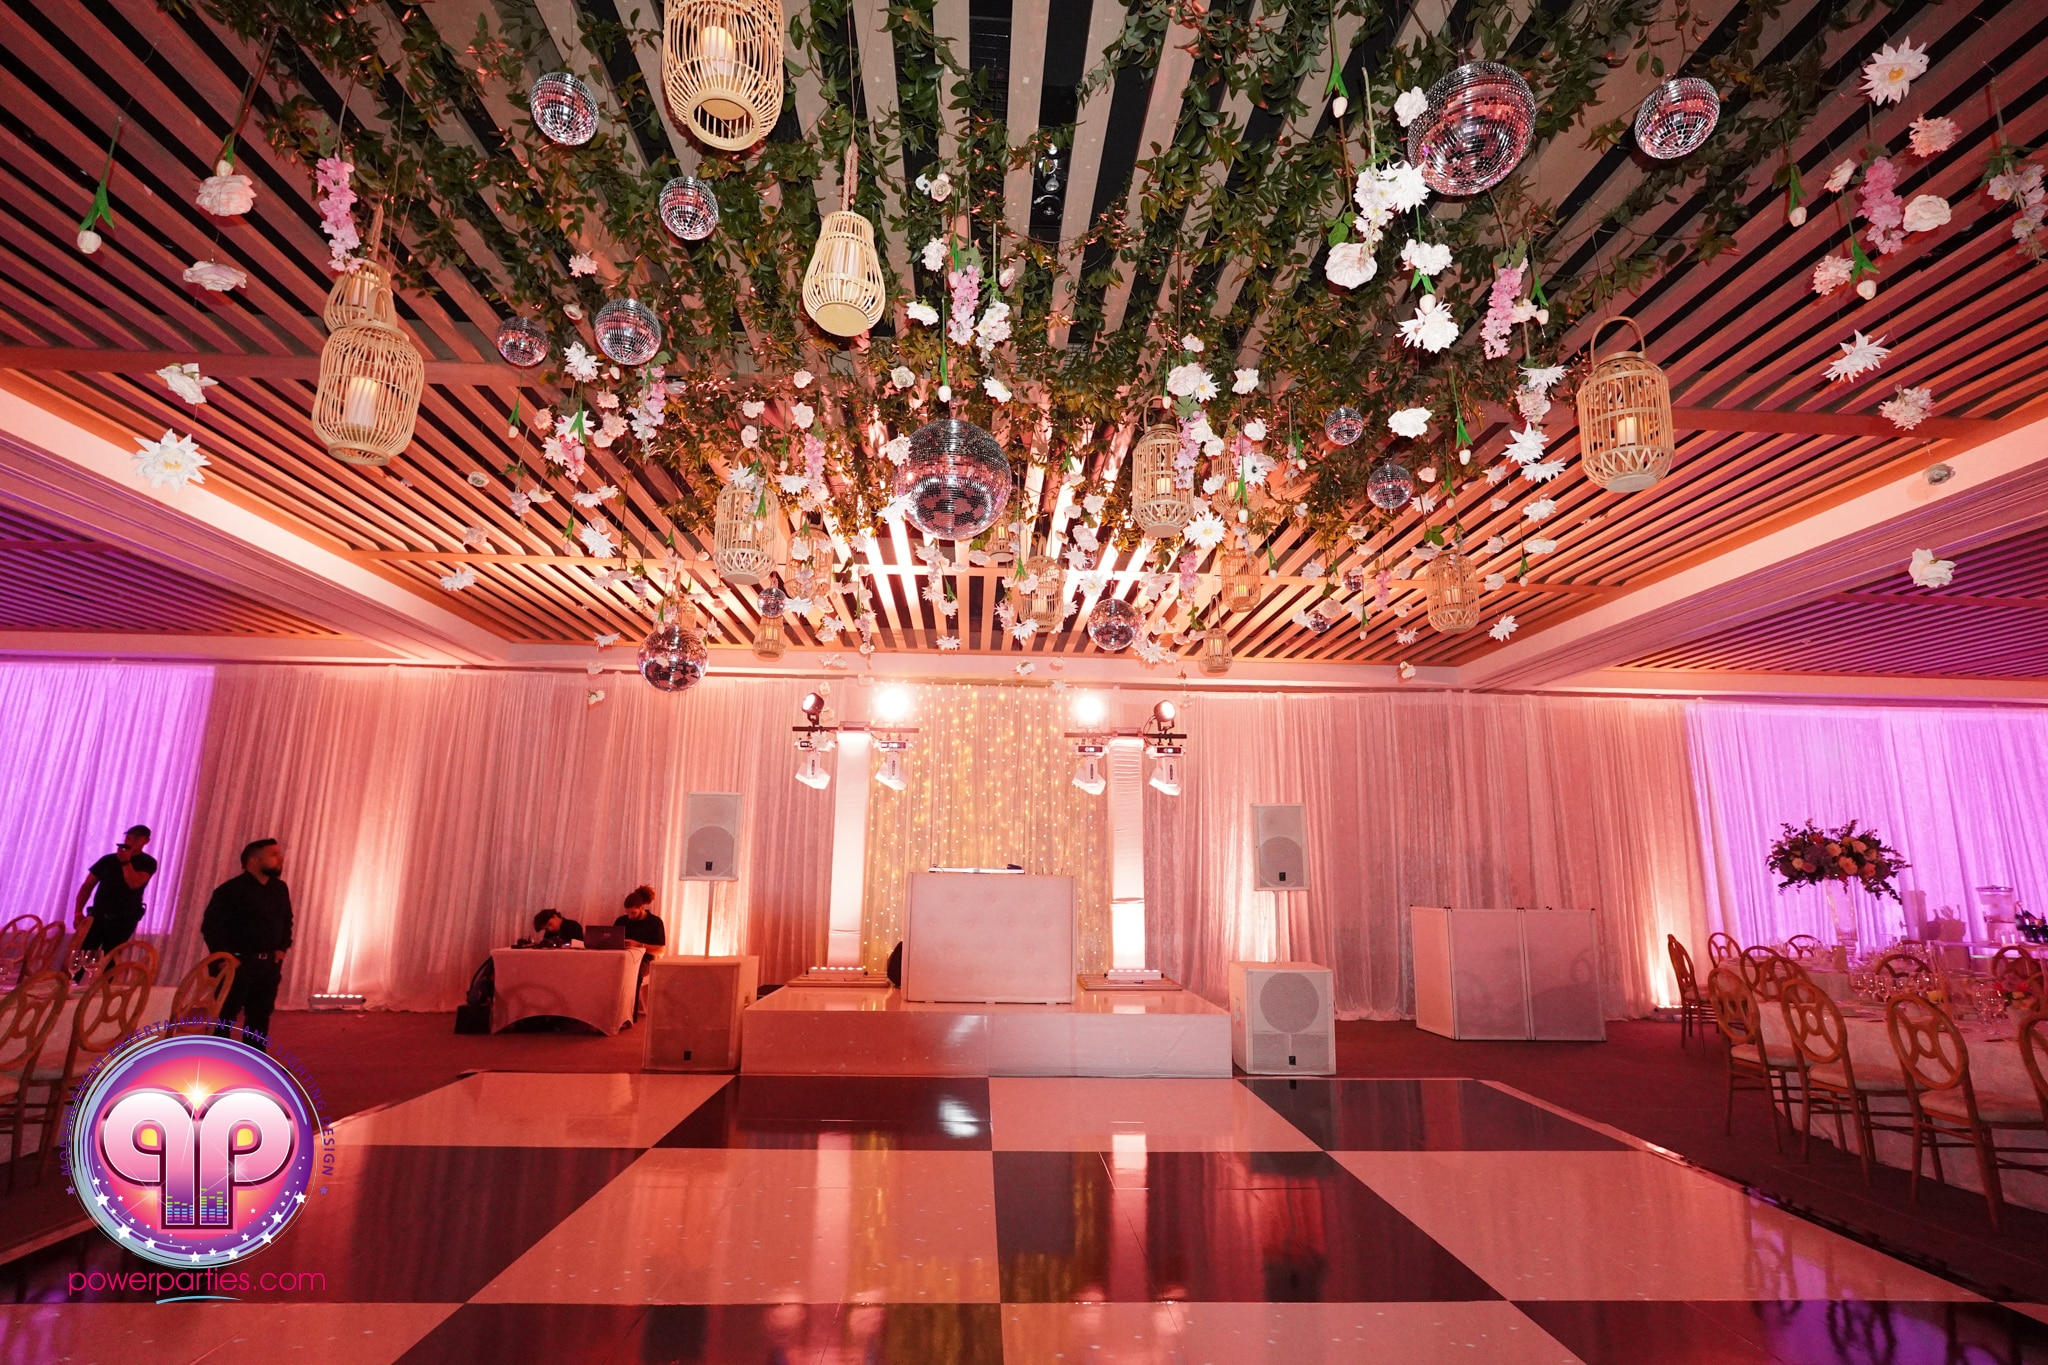 Elegant wedding reception at The Edition Miami Beach with vibrant blush lighting. the ceiling is adorned with wooden slats and hanging floral arrangements, complemented by suspended ornate lanterns. tables set for guests with a lit central stage. By www.powerparties.com